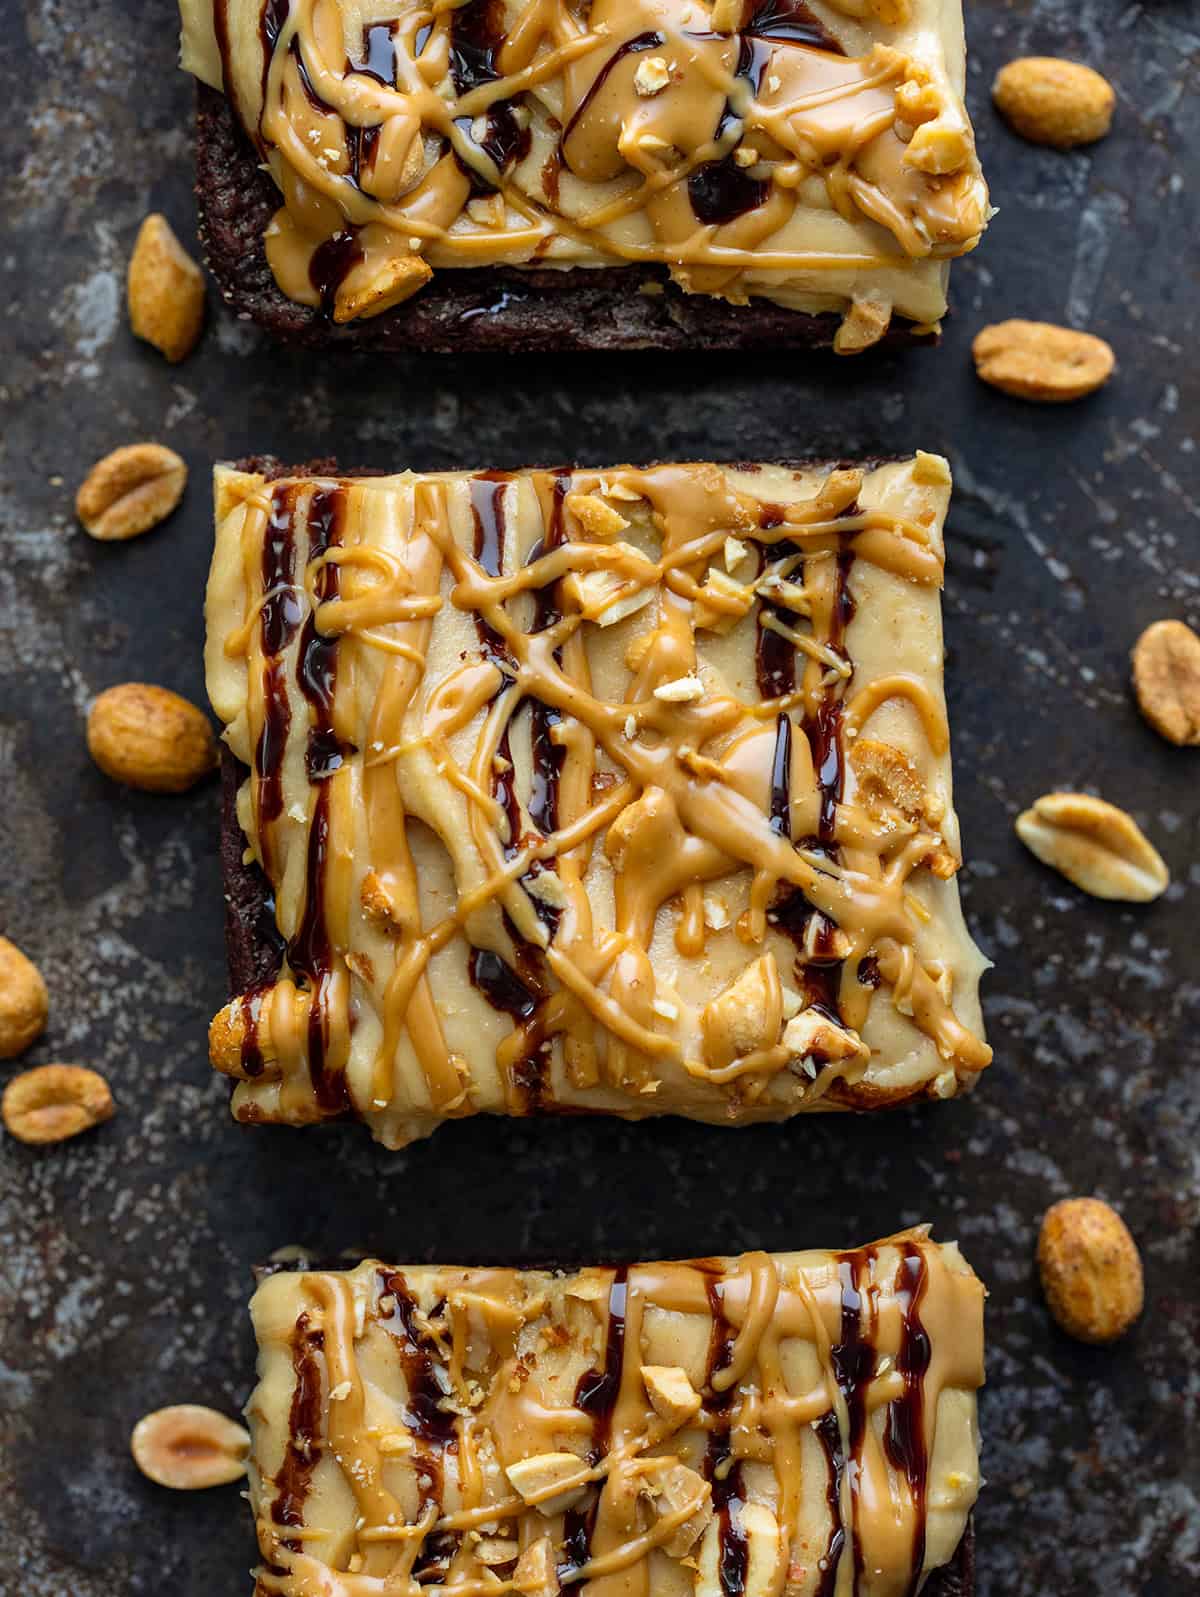 Three Peanut Butter Mousse Brownies on a baking sheet with peanuts around.